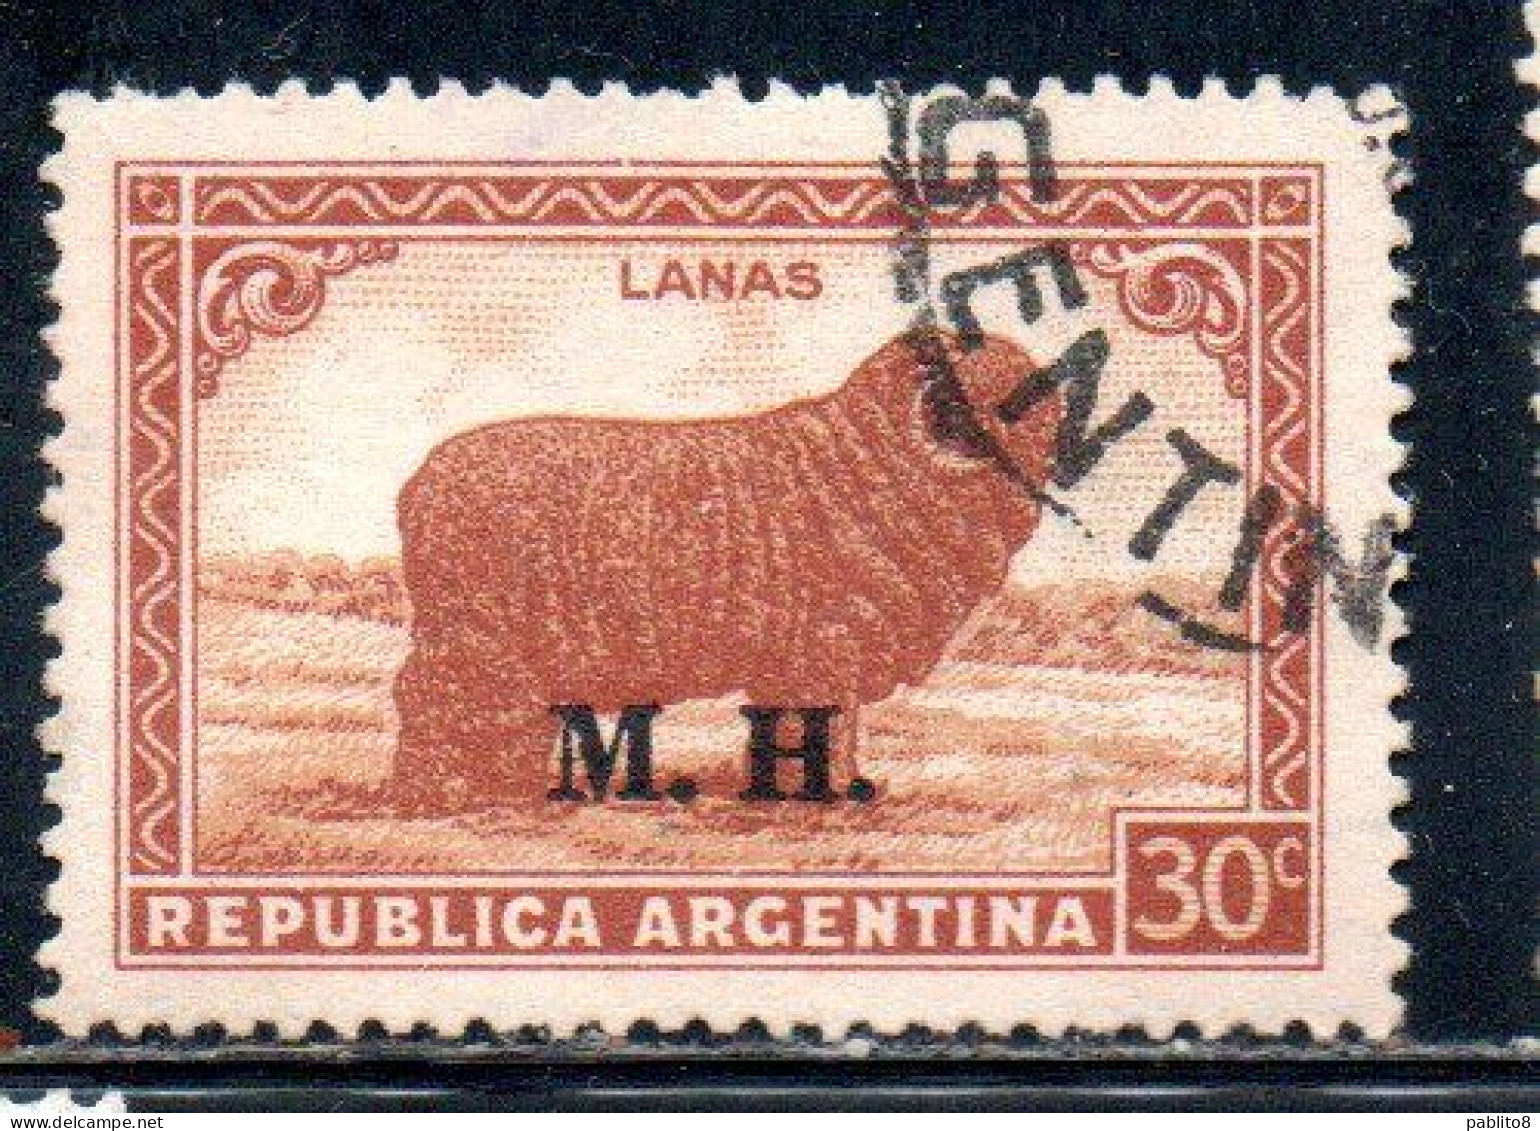 ARGENTINA 1935 1937 OFFICIAL DEPARTMENT STAMP OVERPRINTED M.H. MINISTRY OF FINANCE MH 30c USED USADO - Service